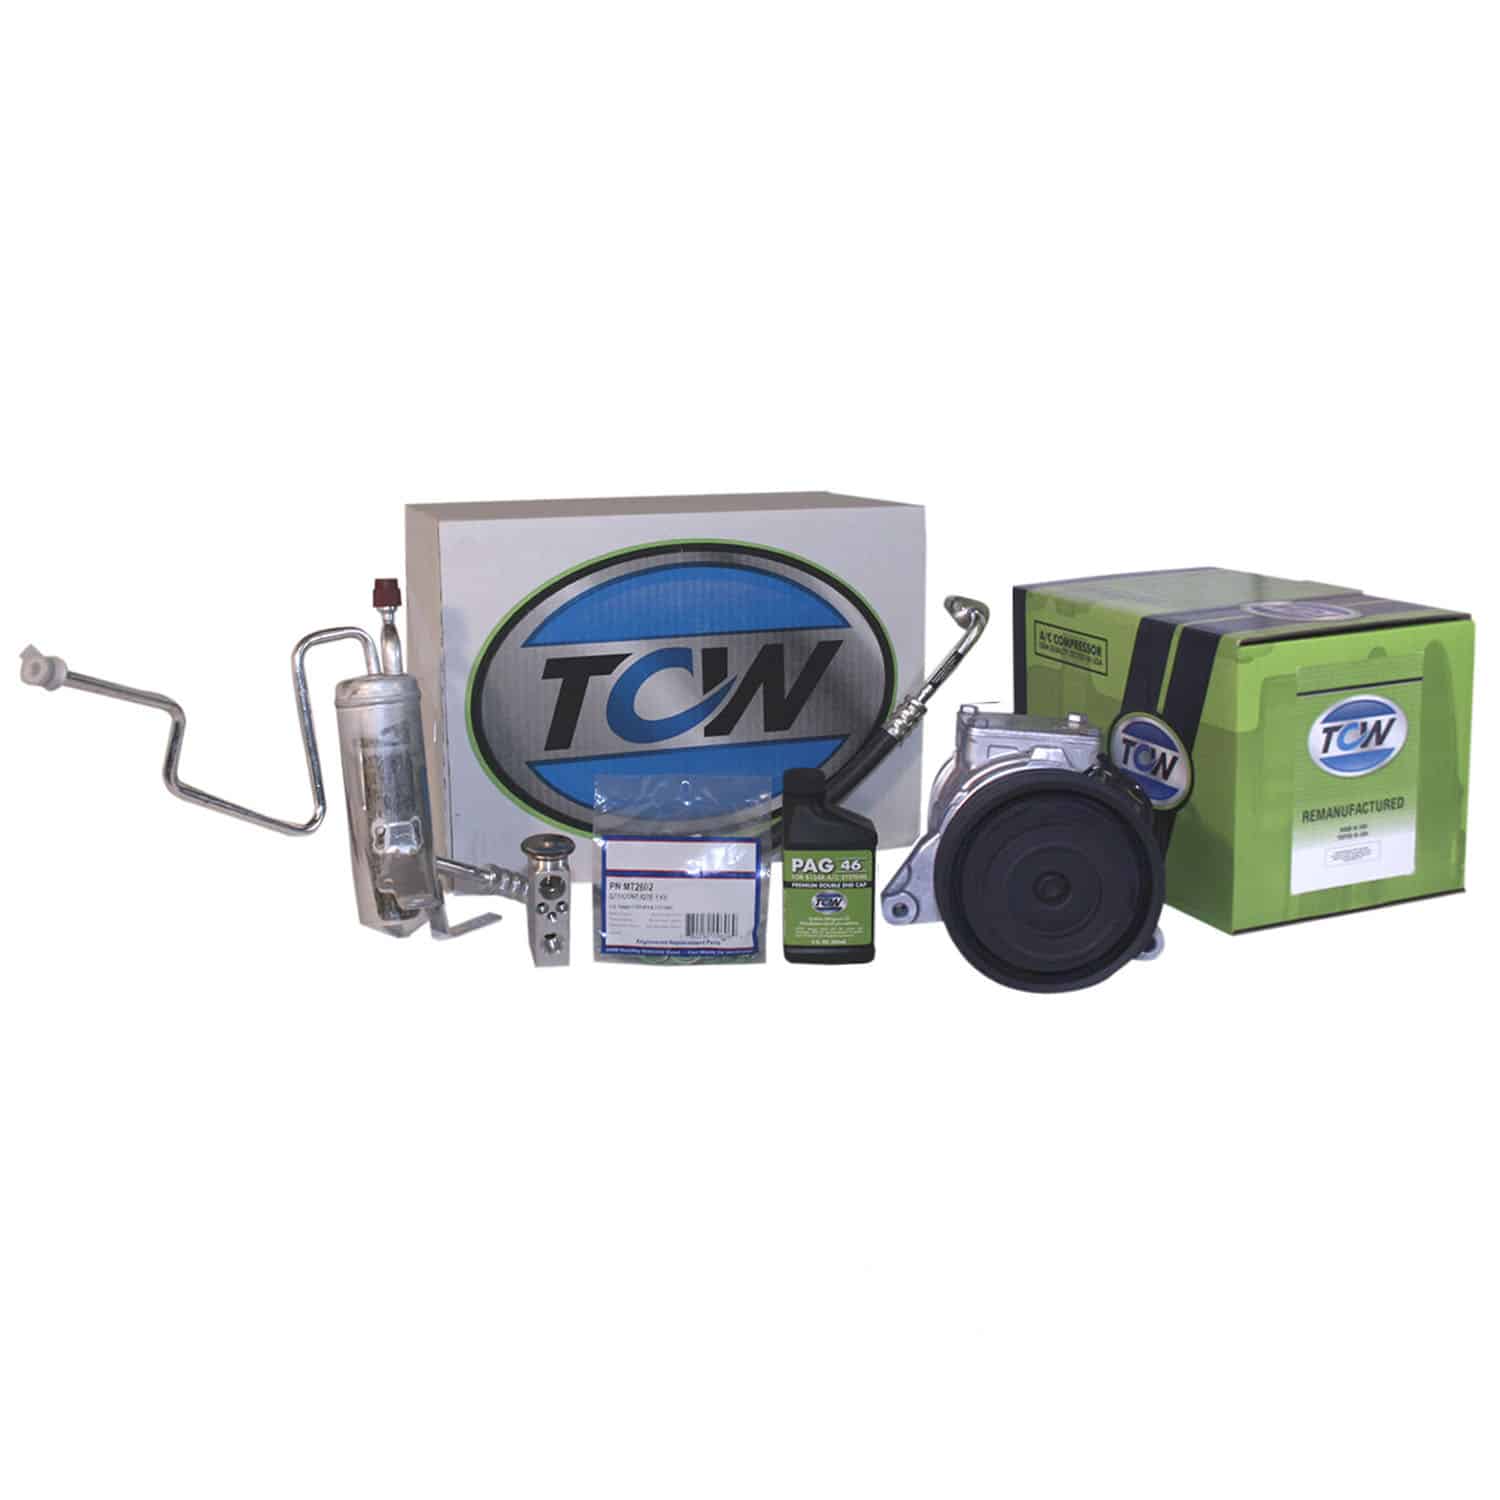 TCW Vehicle A/C Kit K1000213R Remanufactured Product Image field_60b6a13a6e67c